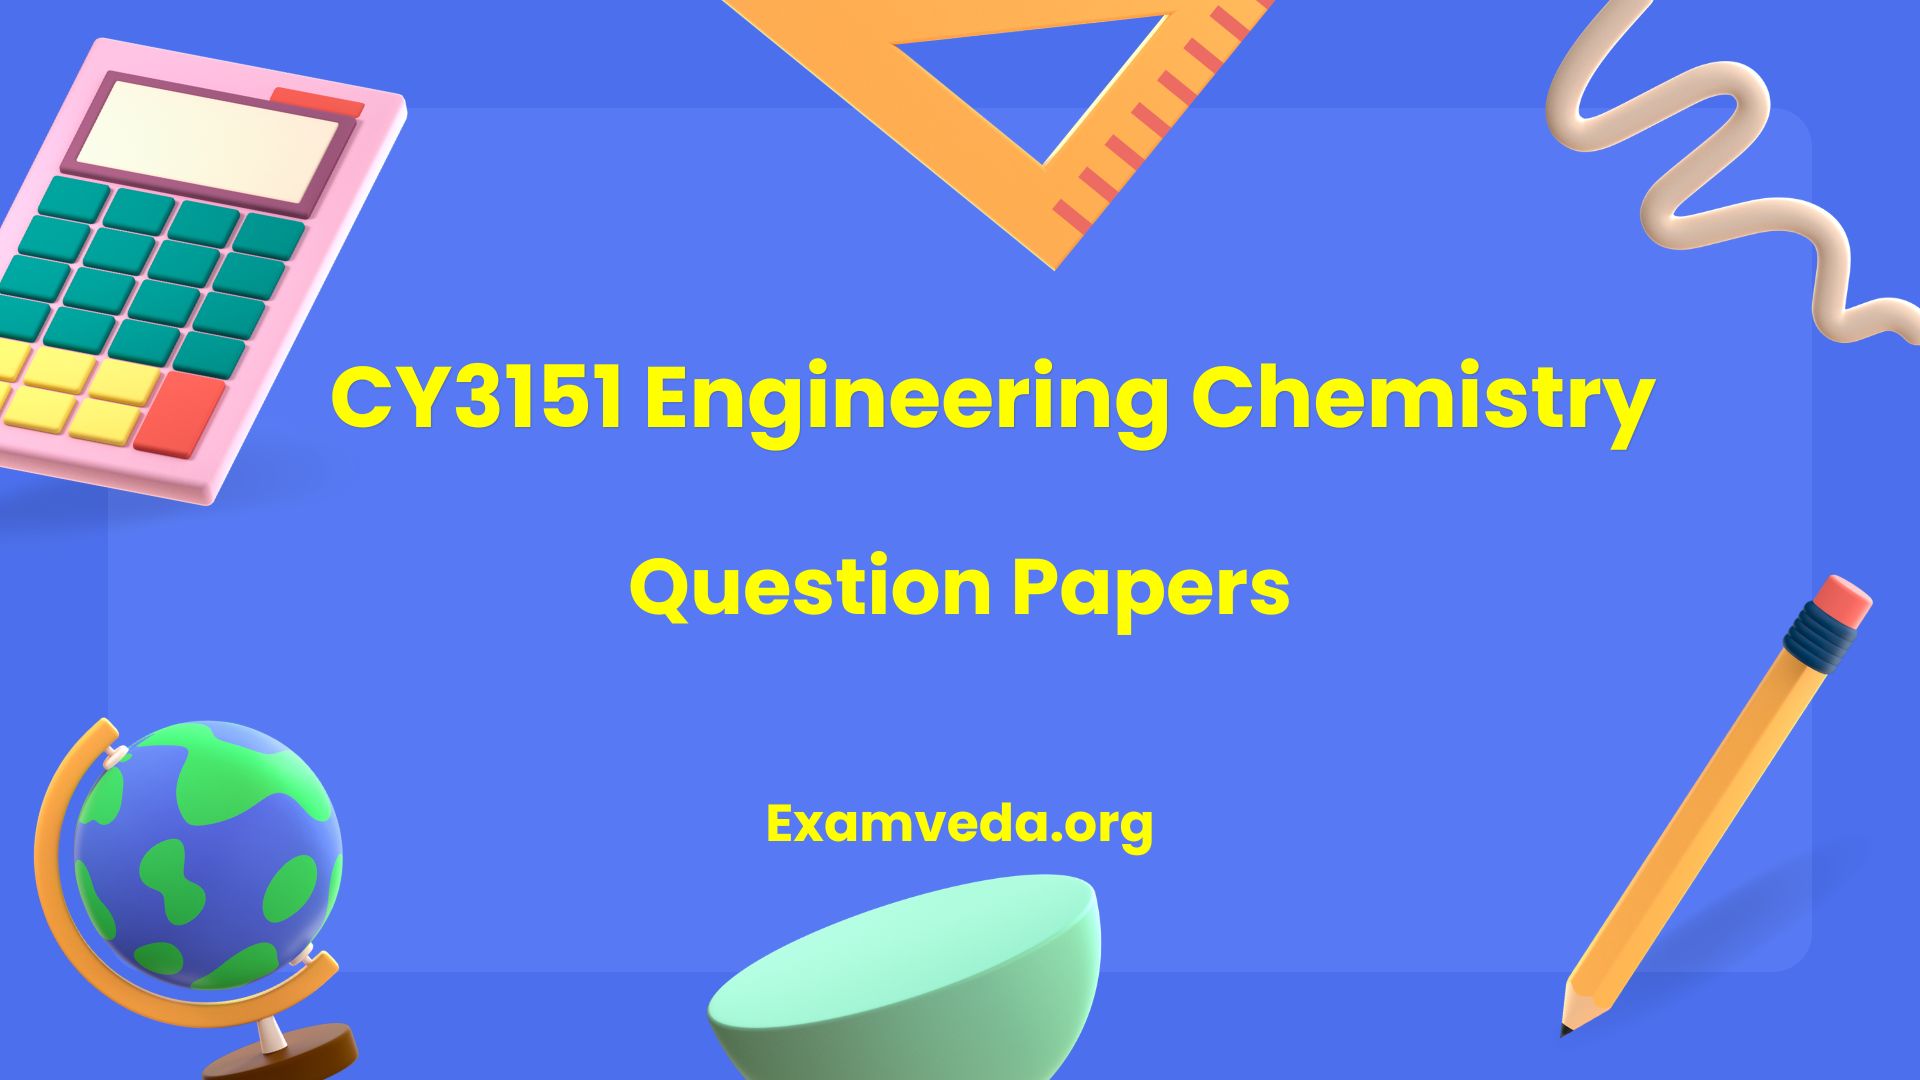 CY3151 Engineering Chemistry Question Papers